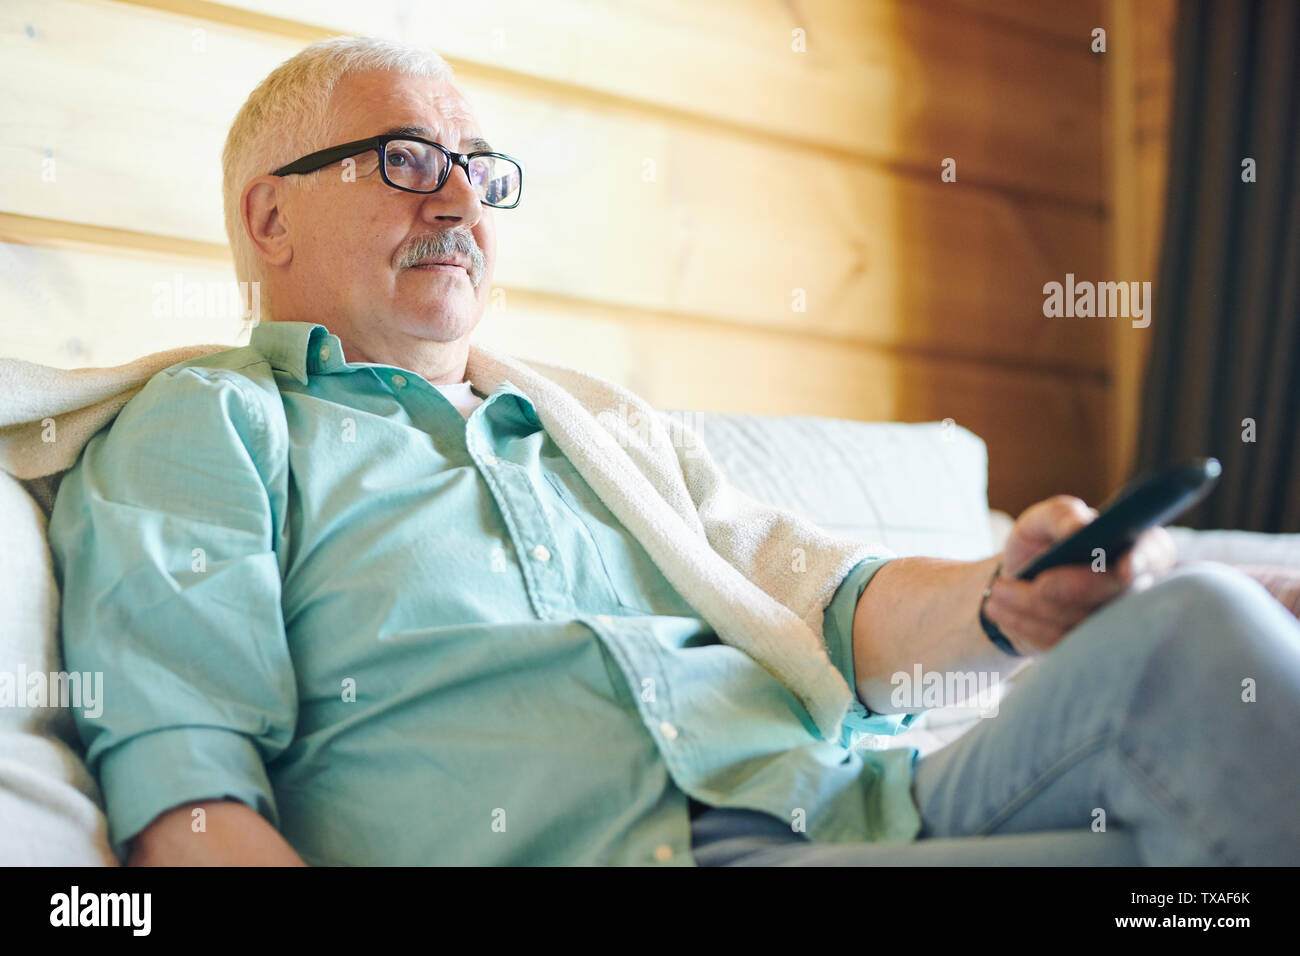 Restful senior man in eyeglasses and casualwear using remote control Stock Photo